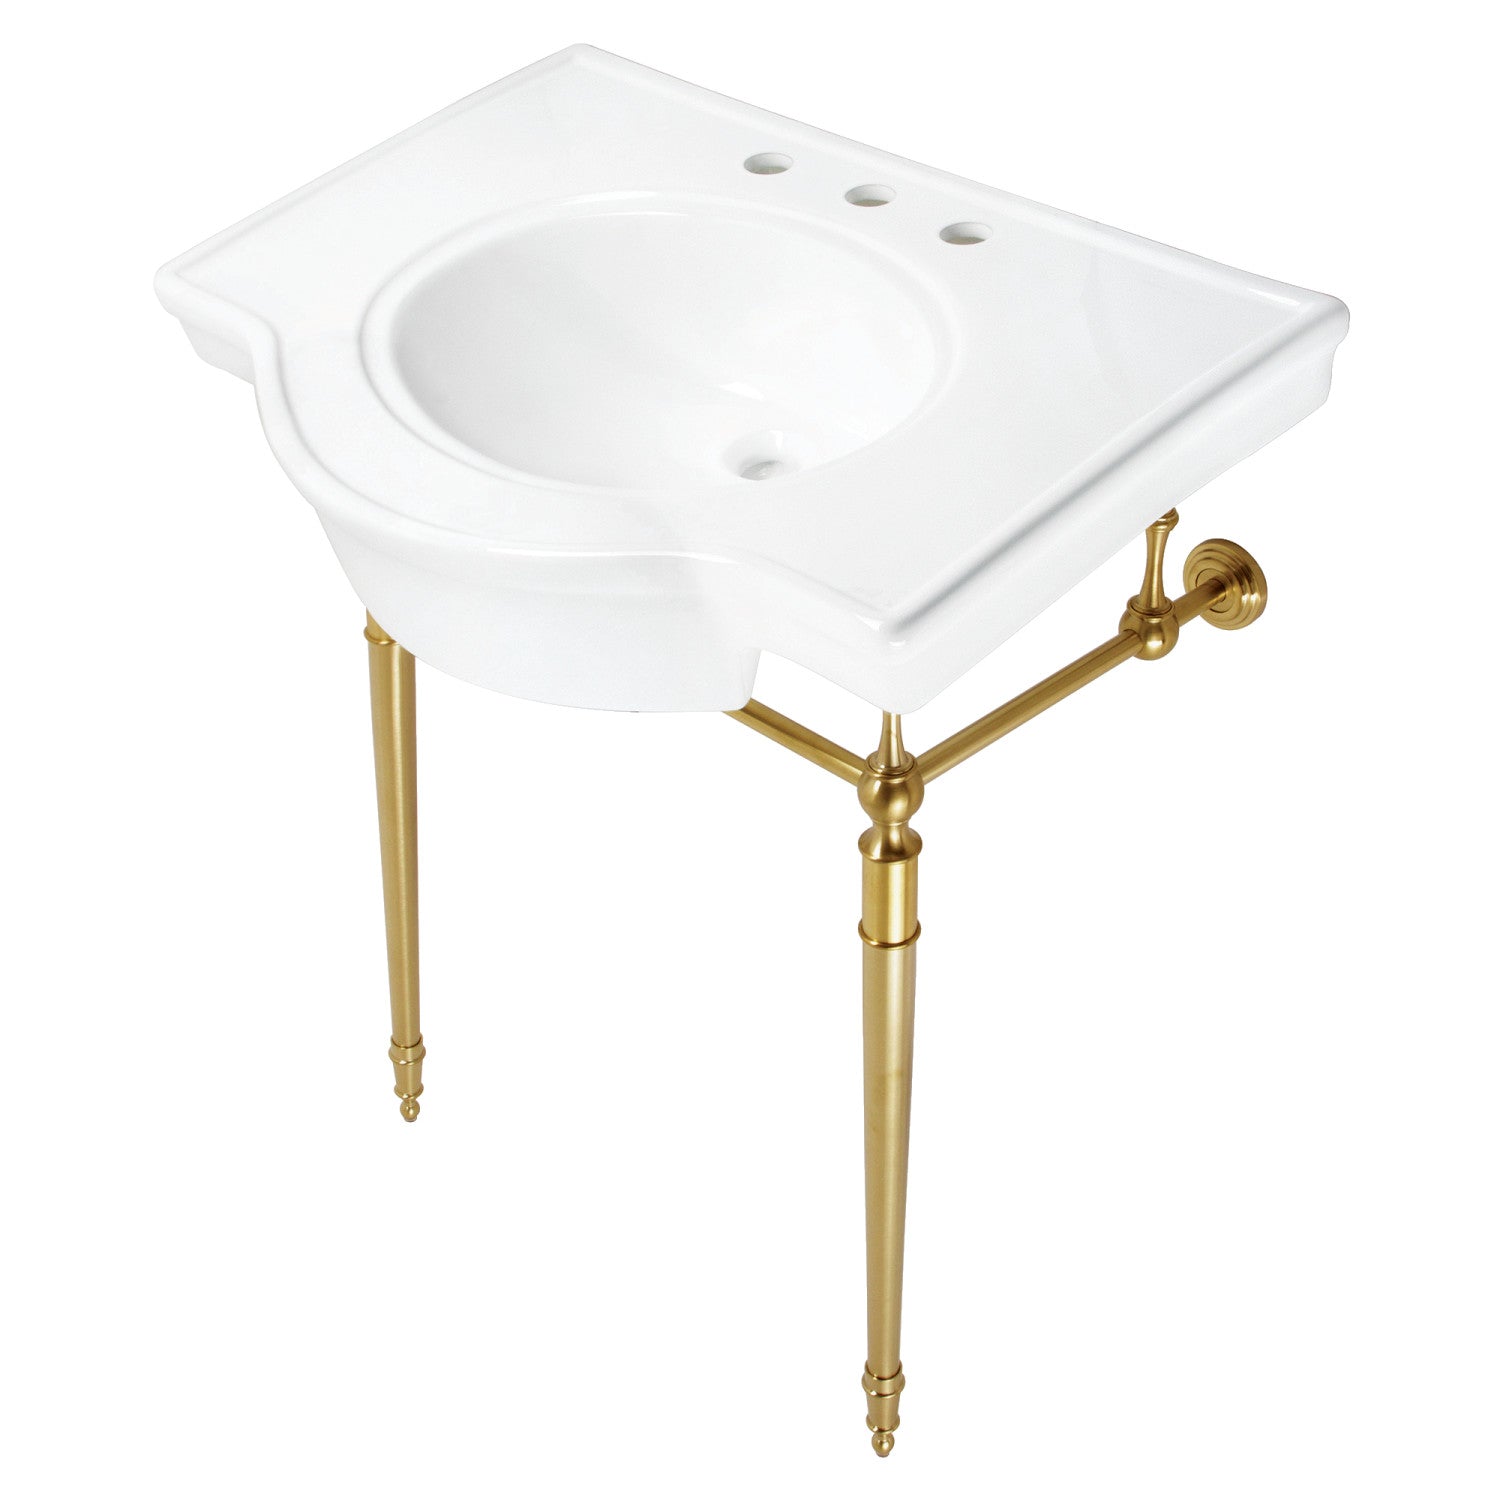 Edwardian VPB2215337ST 31-Inch Console Sink with Brass Legs, White/Brushed Brass